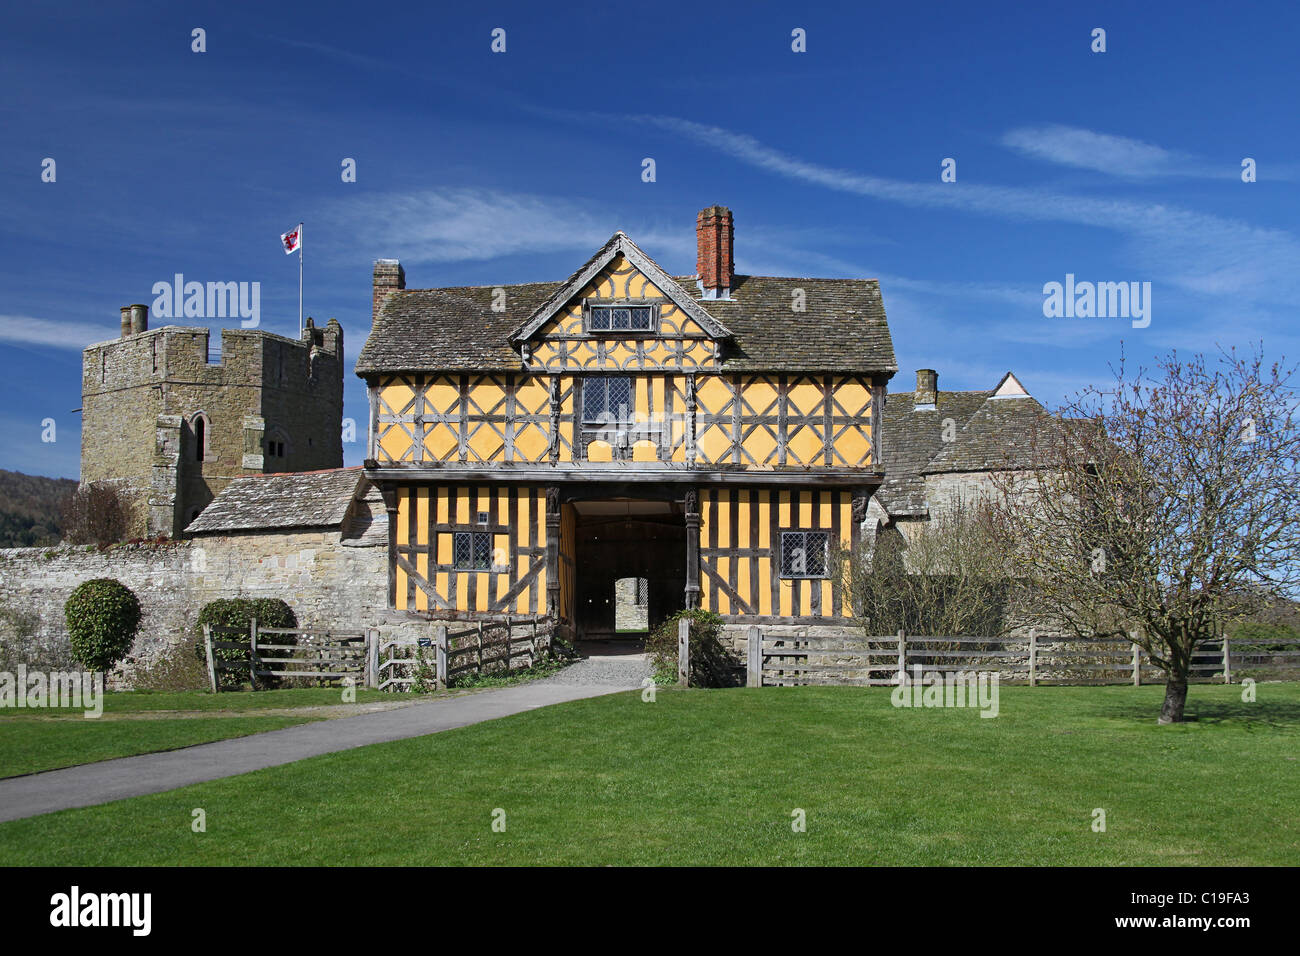 The colorful half-timbered gatehouse at the entrance to Stokesay Castle, Shropshire, England, UK Stock Photo